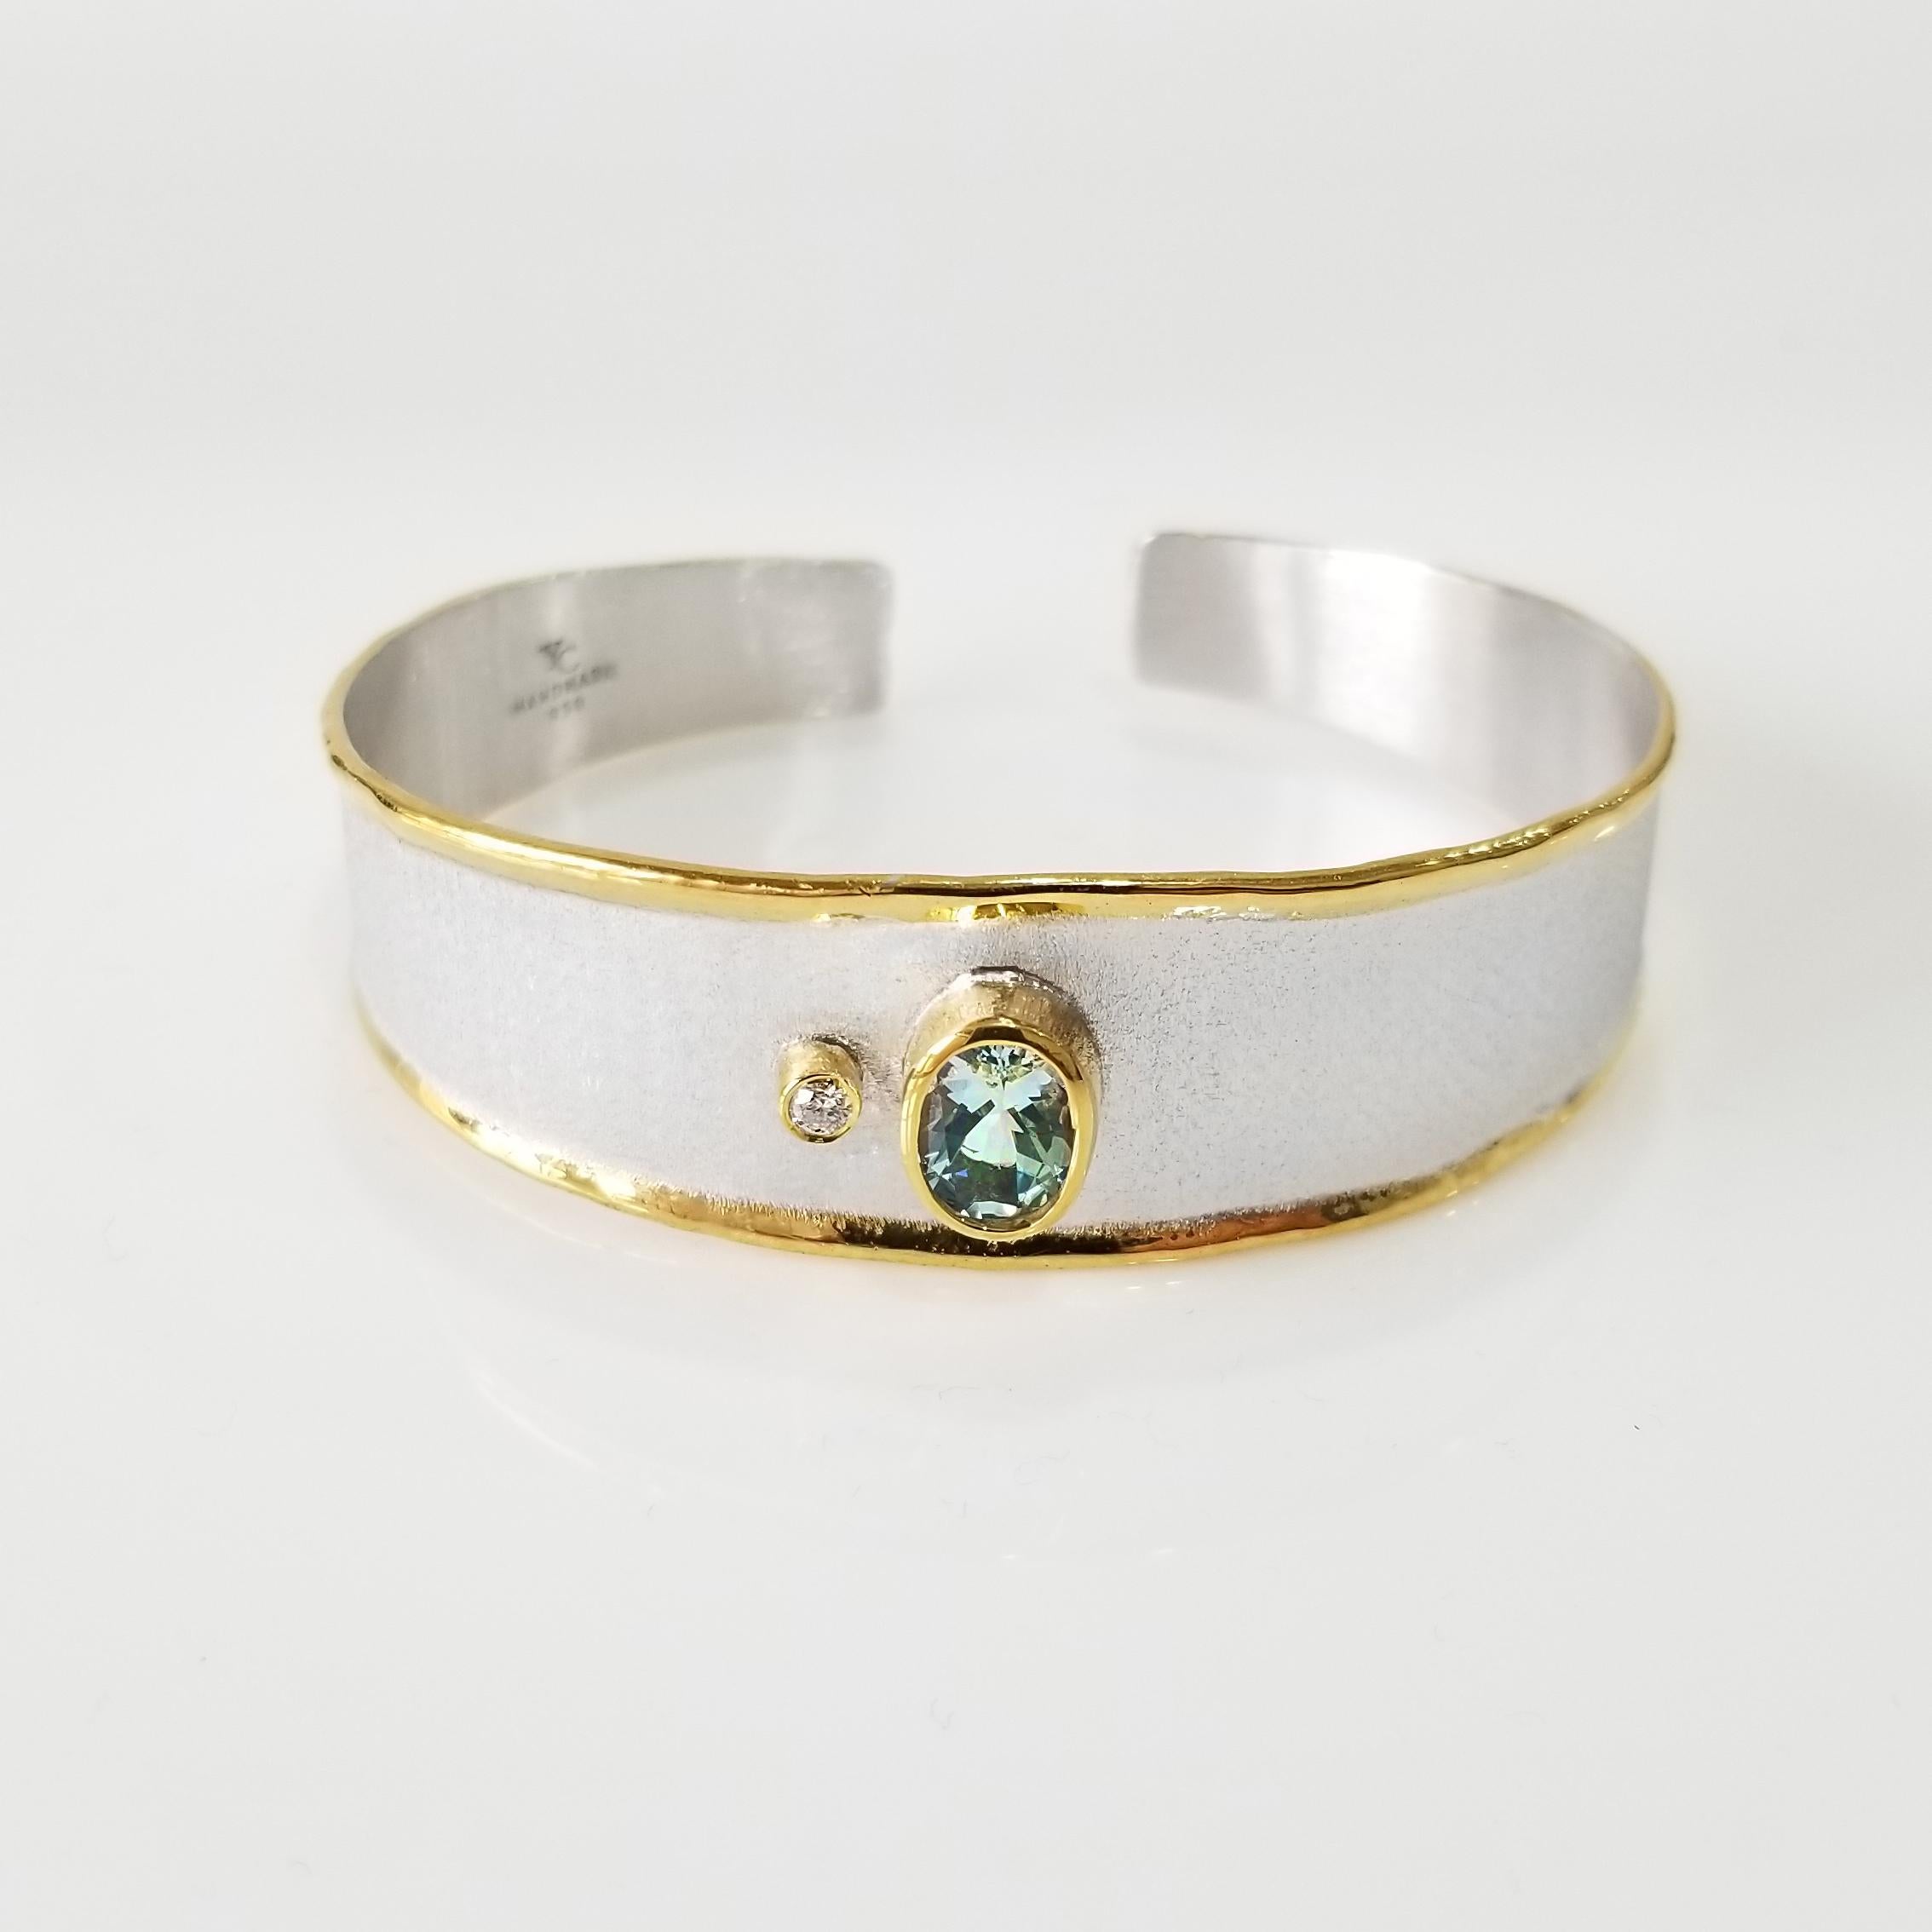 Yianni Creations Aquamarine Diamond Fine Silver 24 Karat Gold Two-Tone Bracelet In New Condition For Sale In Astoria, NY